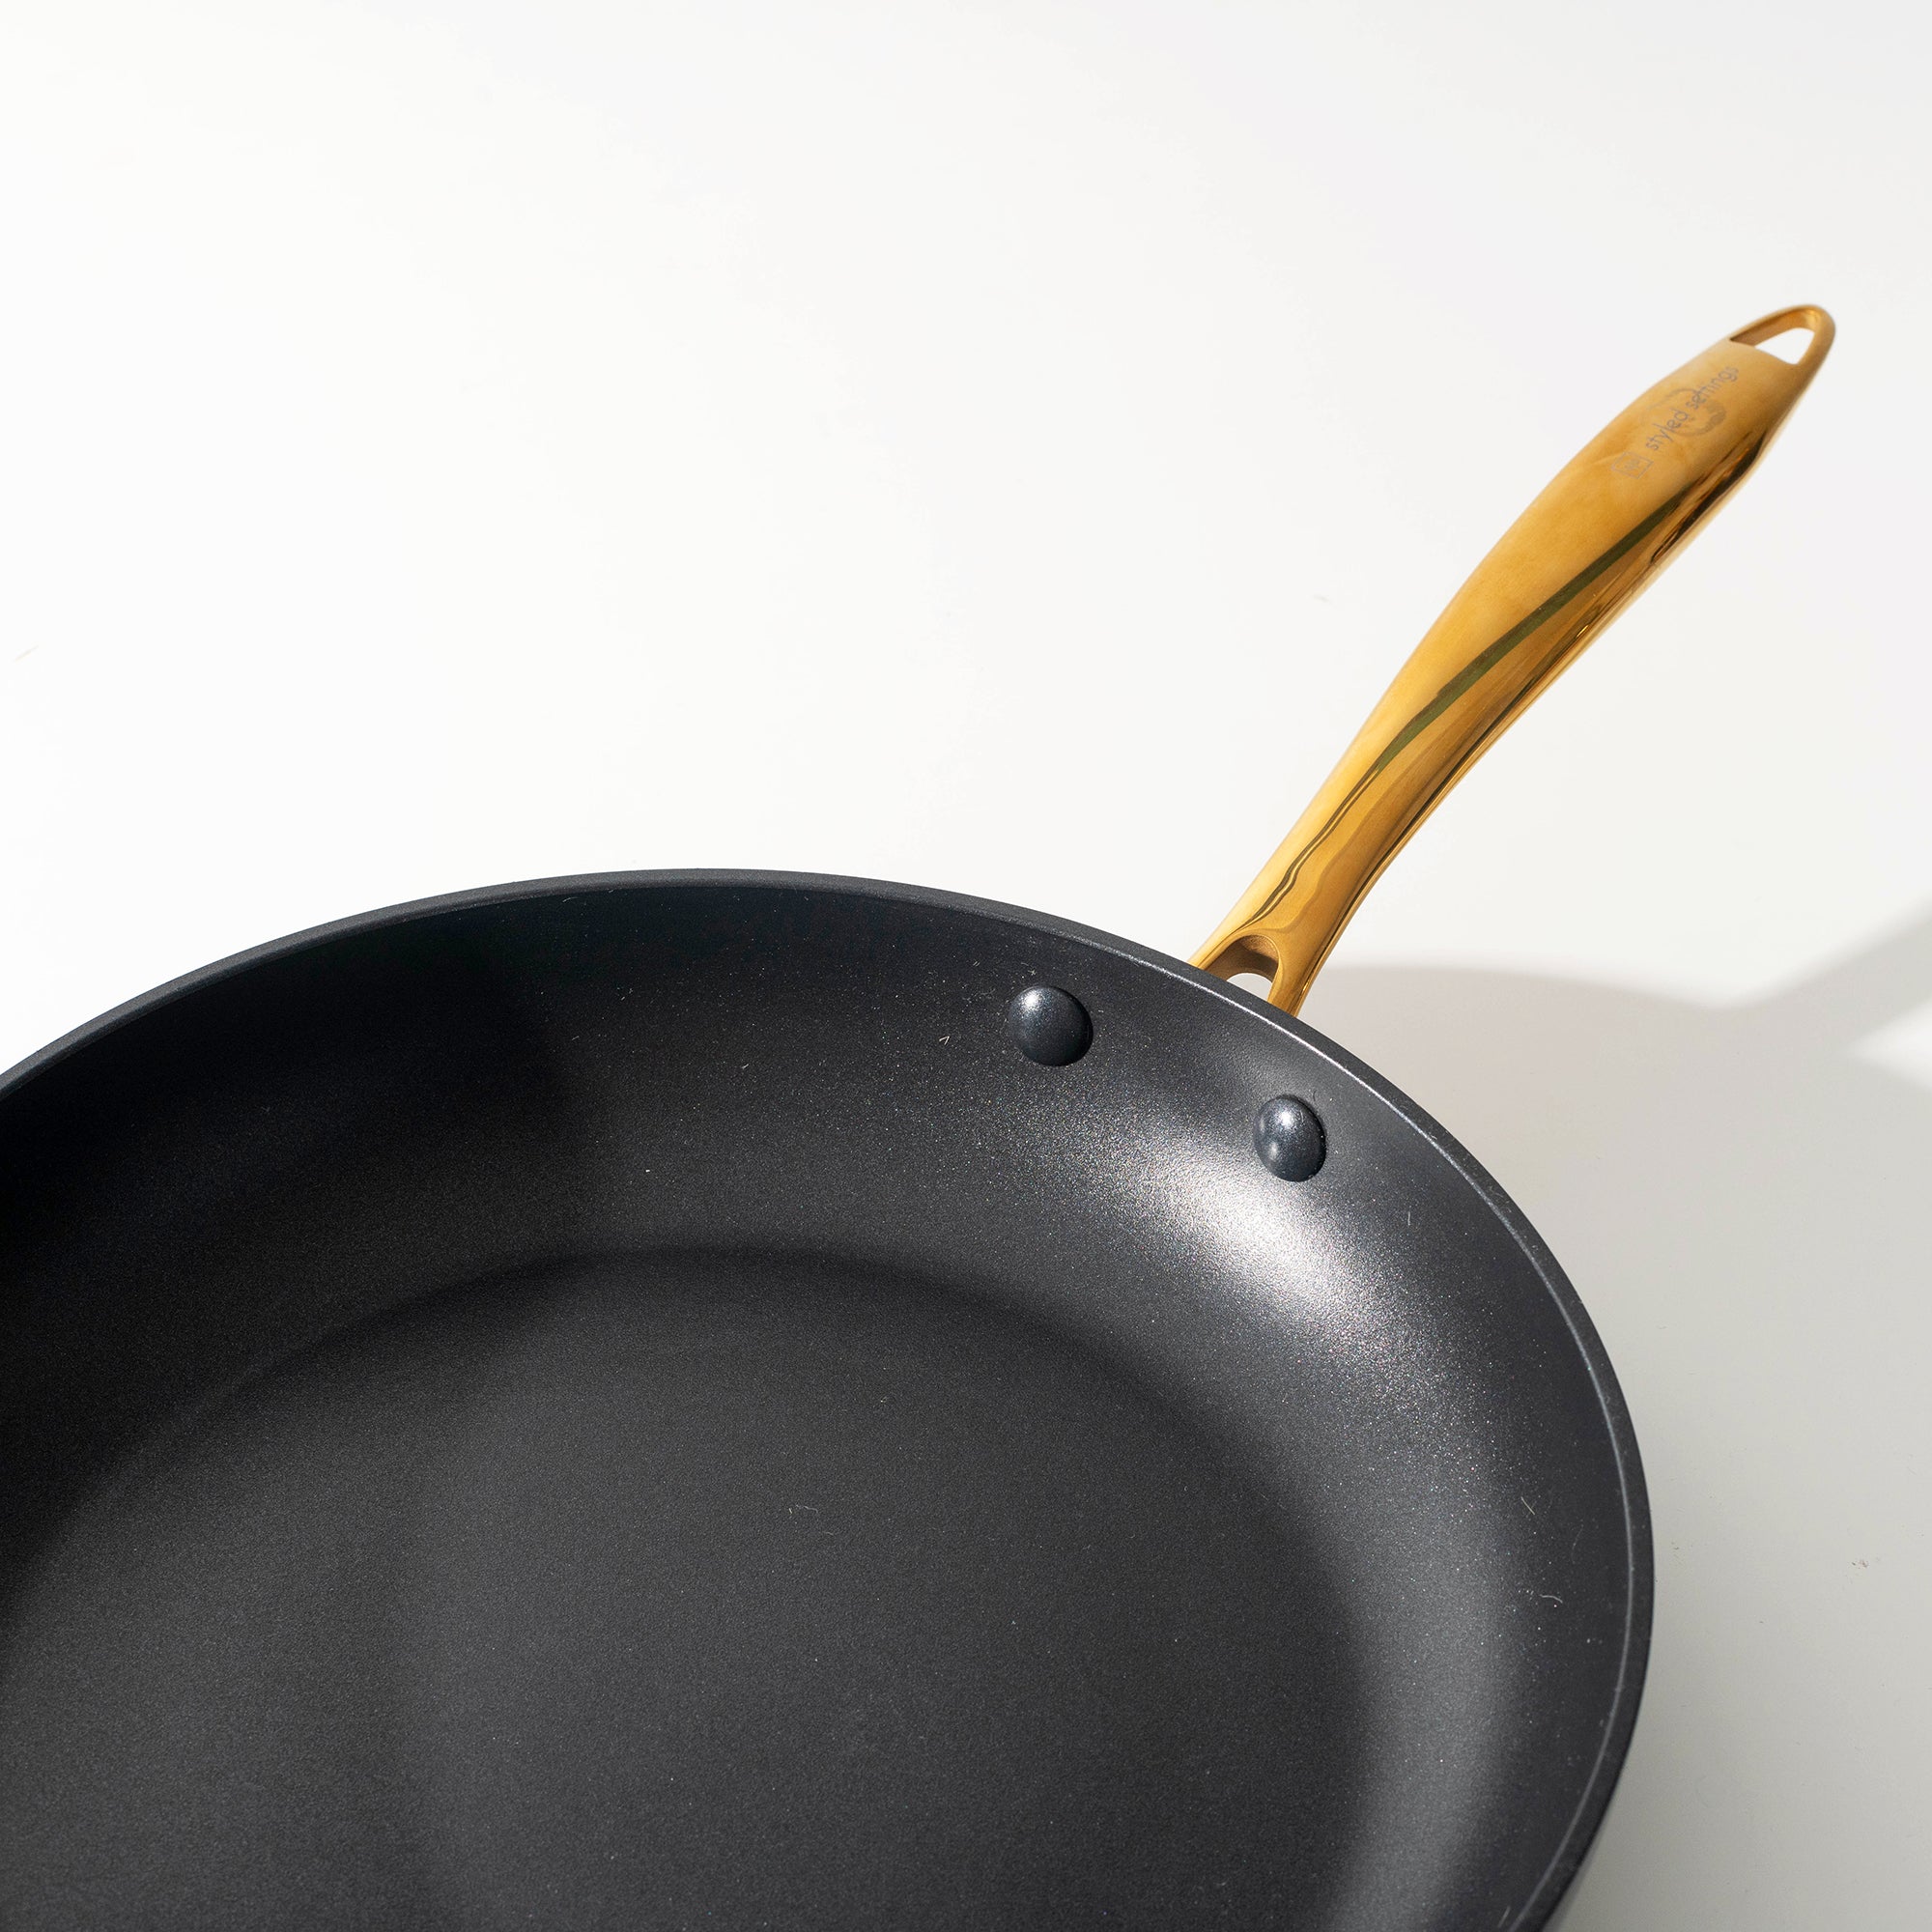 Styled Settings Black and Gold Nonstick Stainless Steel Pots and Pans Set